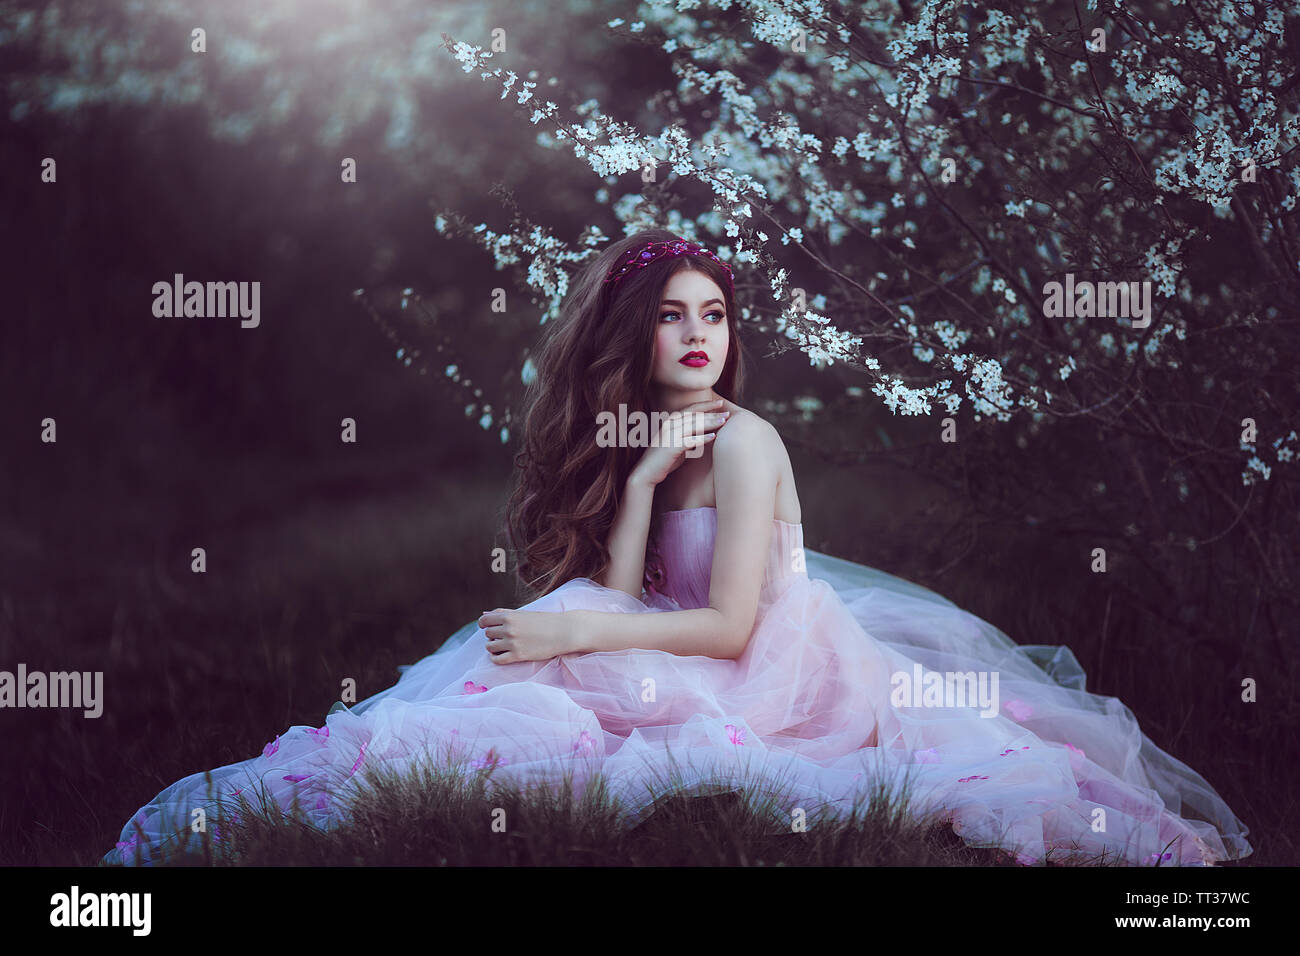 Beautiful Romantic Girl with long hair in fairy long pink dress sitting near flowering tree.Fantasy art. Creative colors and Artistic processing. Stock Photo